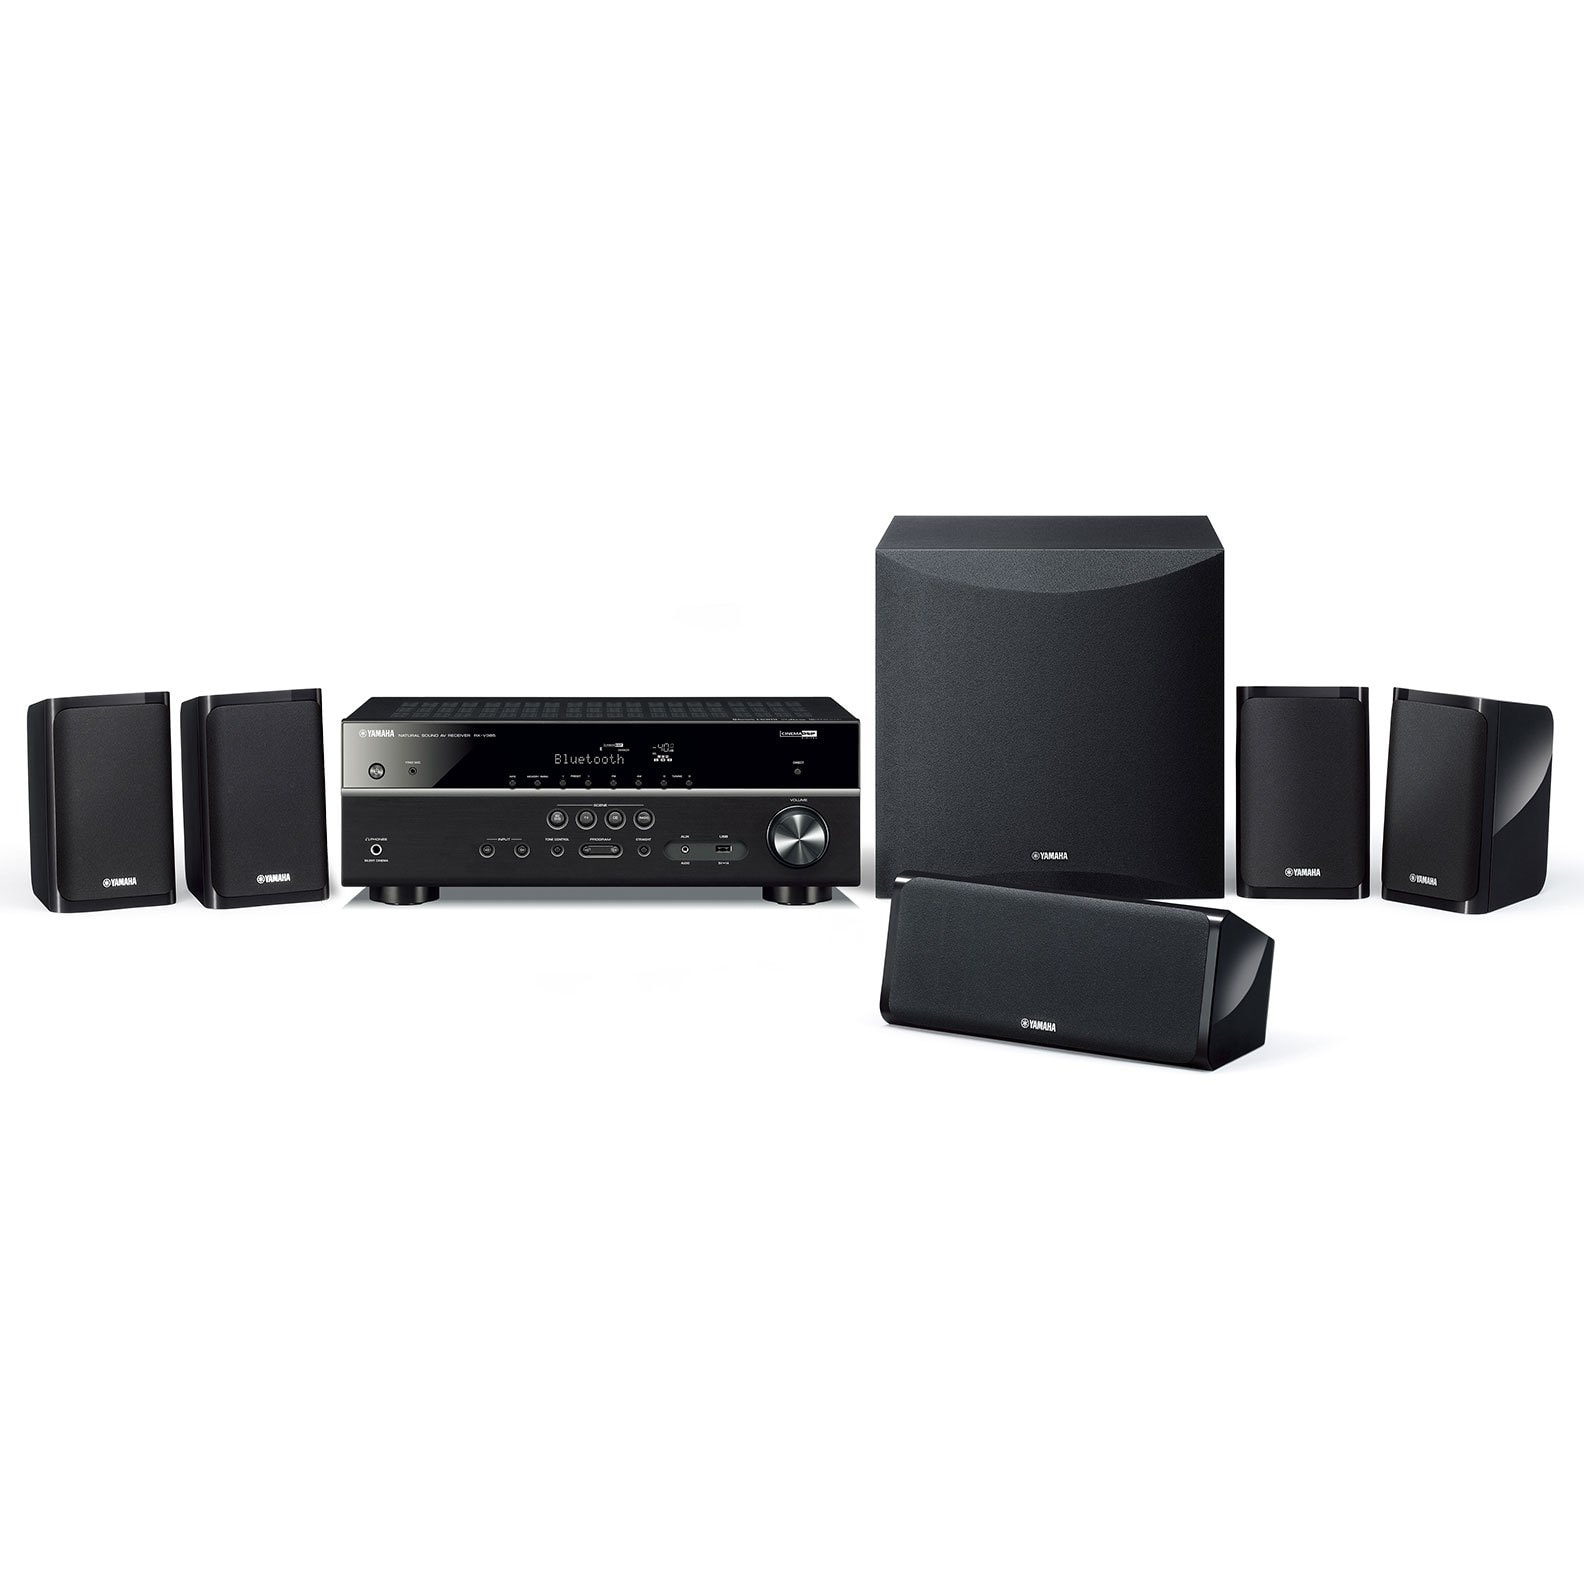 YHT-4950U - Overview - Home Theater Systems - Audio ...